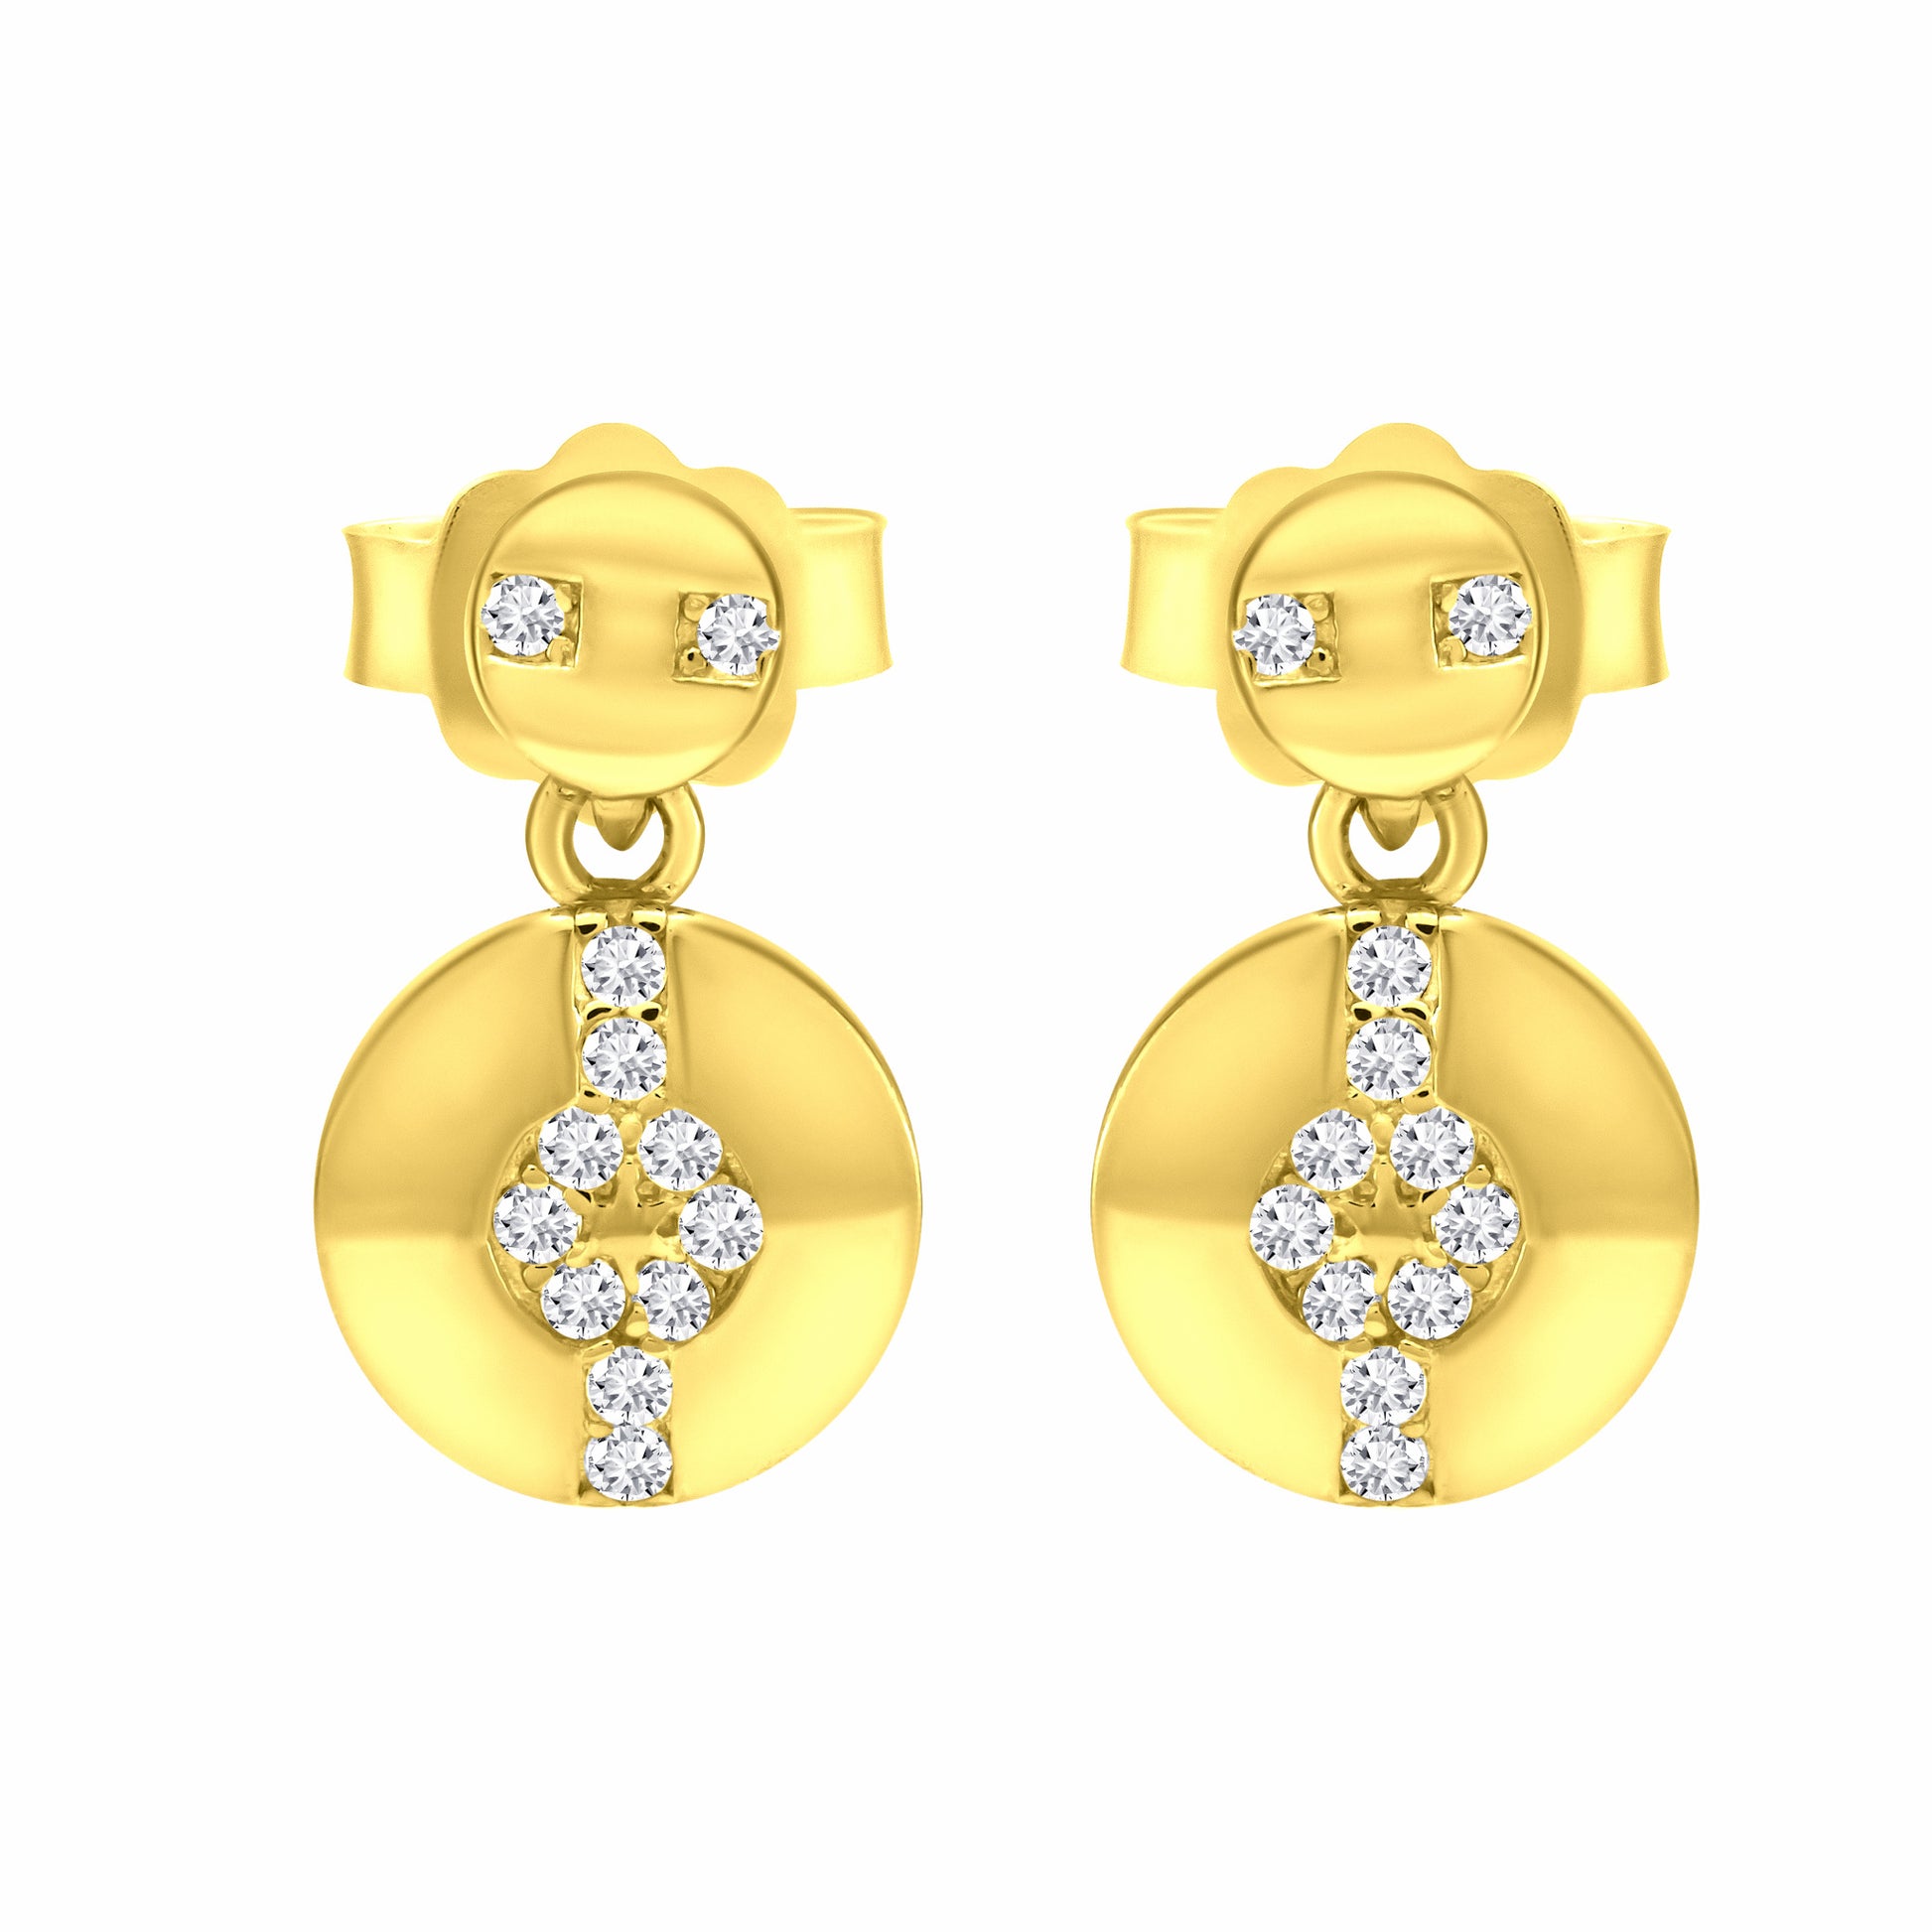 Hypnotic Solar Gold Earrings on white background